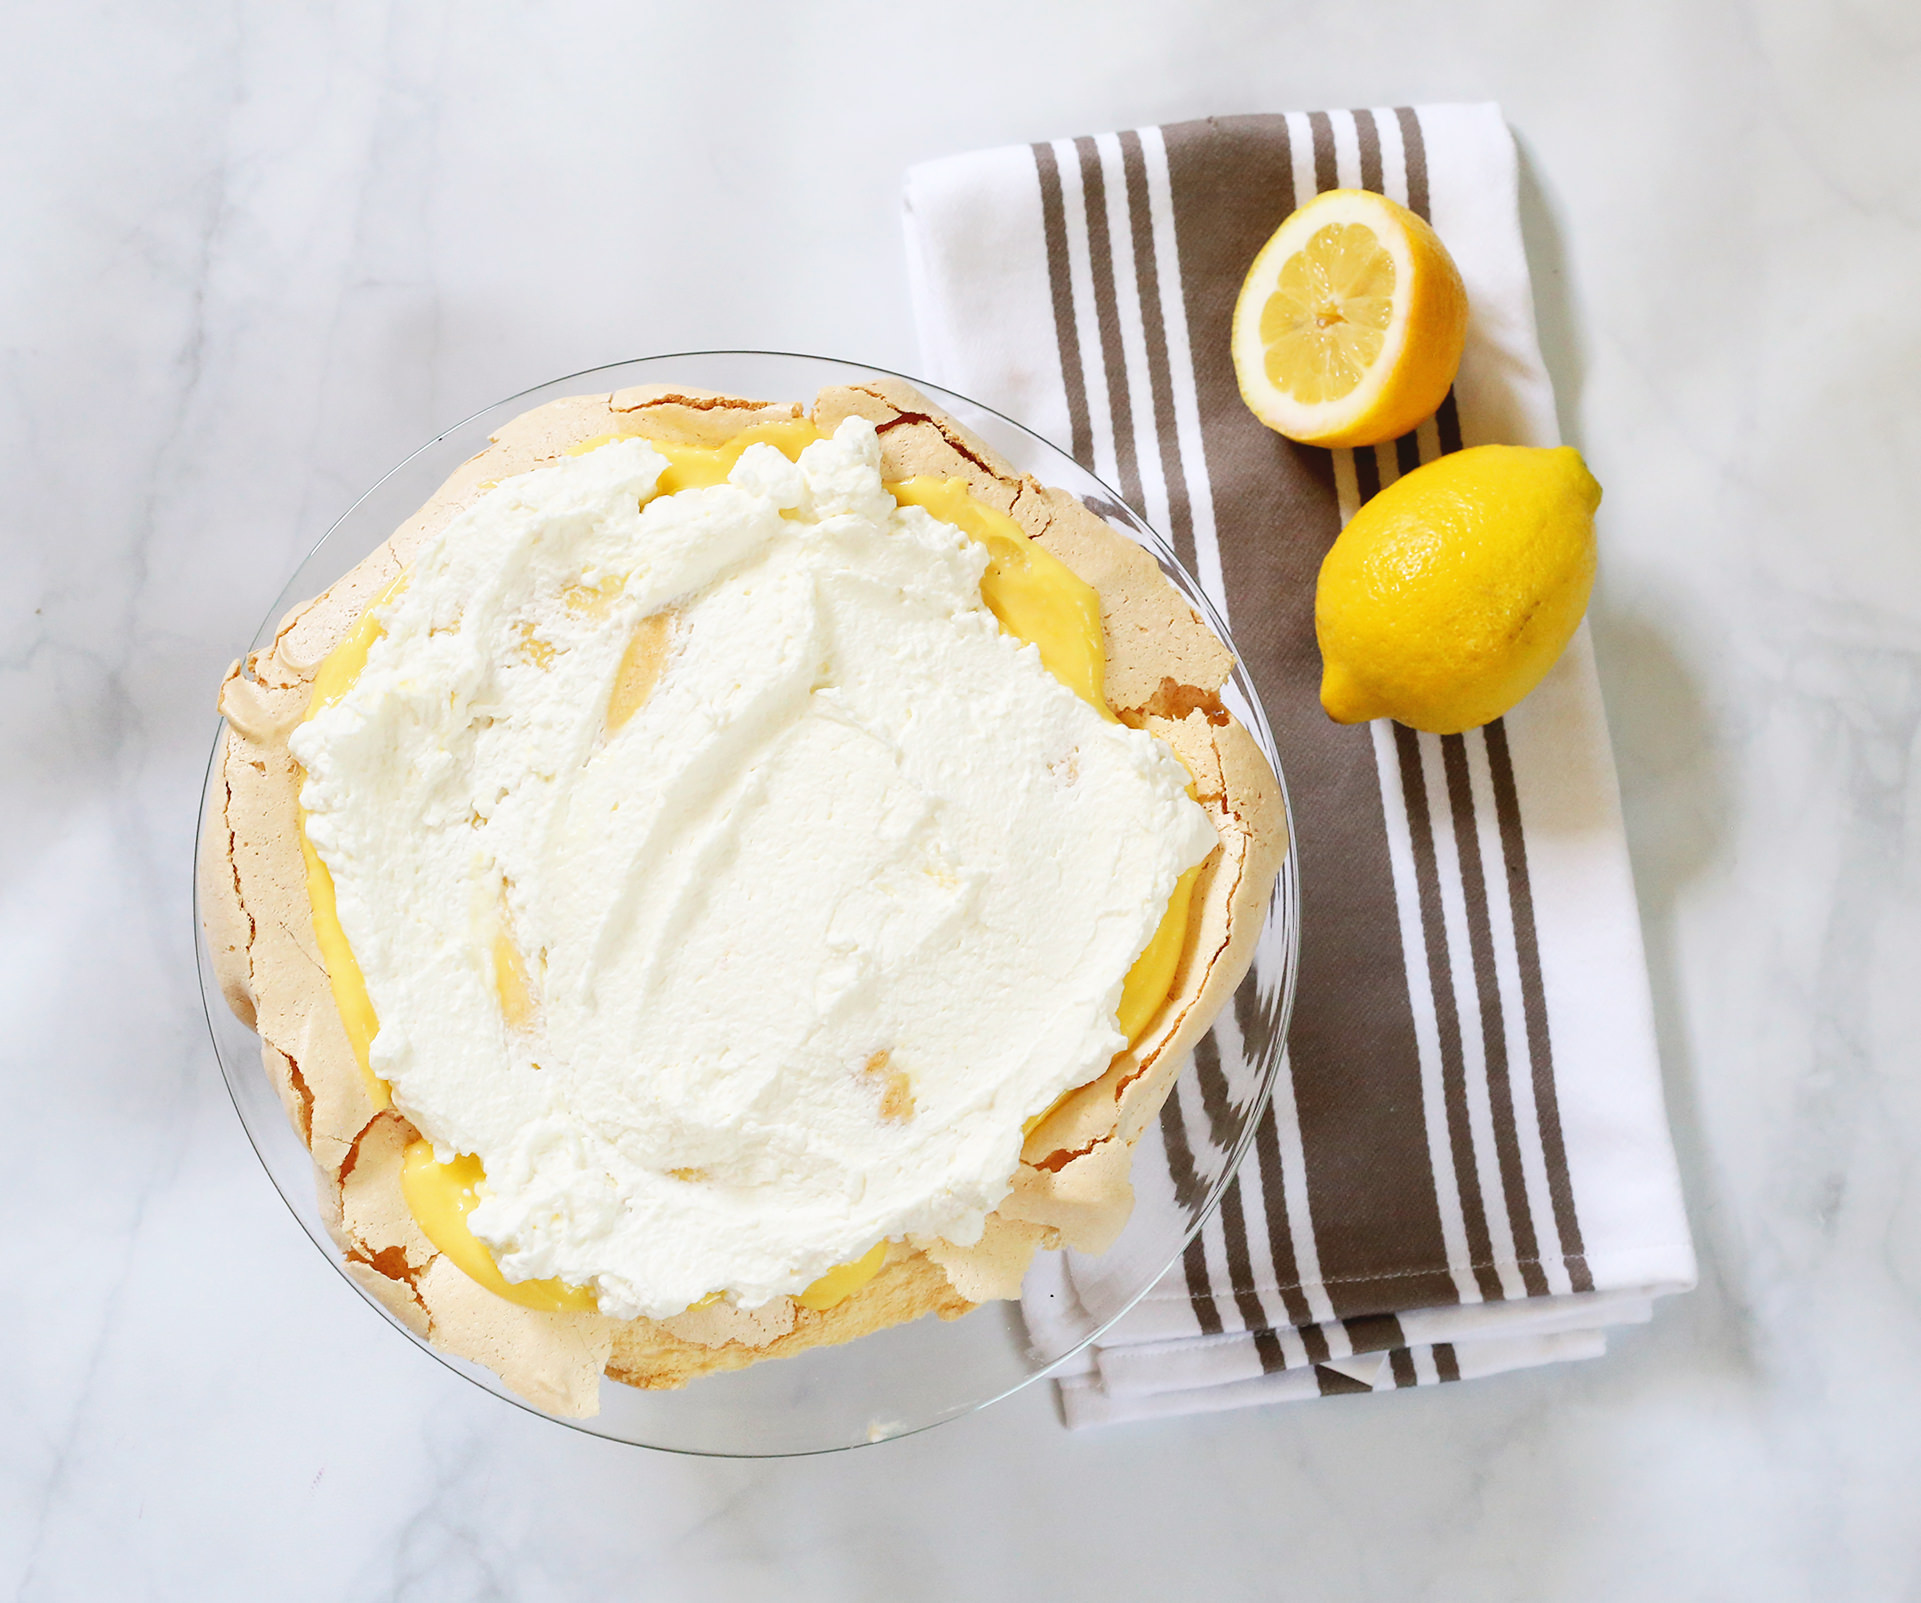 Ina Garten's delicious summer pavlova recipe brought to life via Lily & Val Living